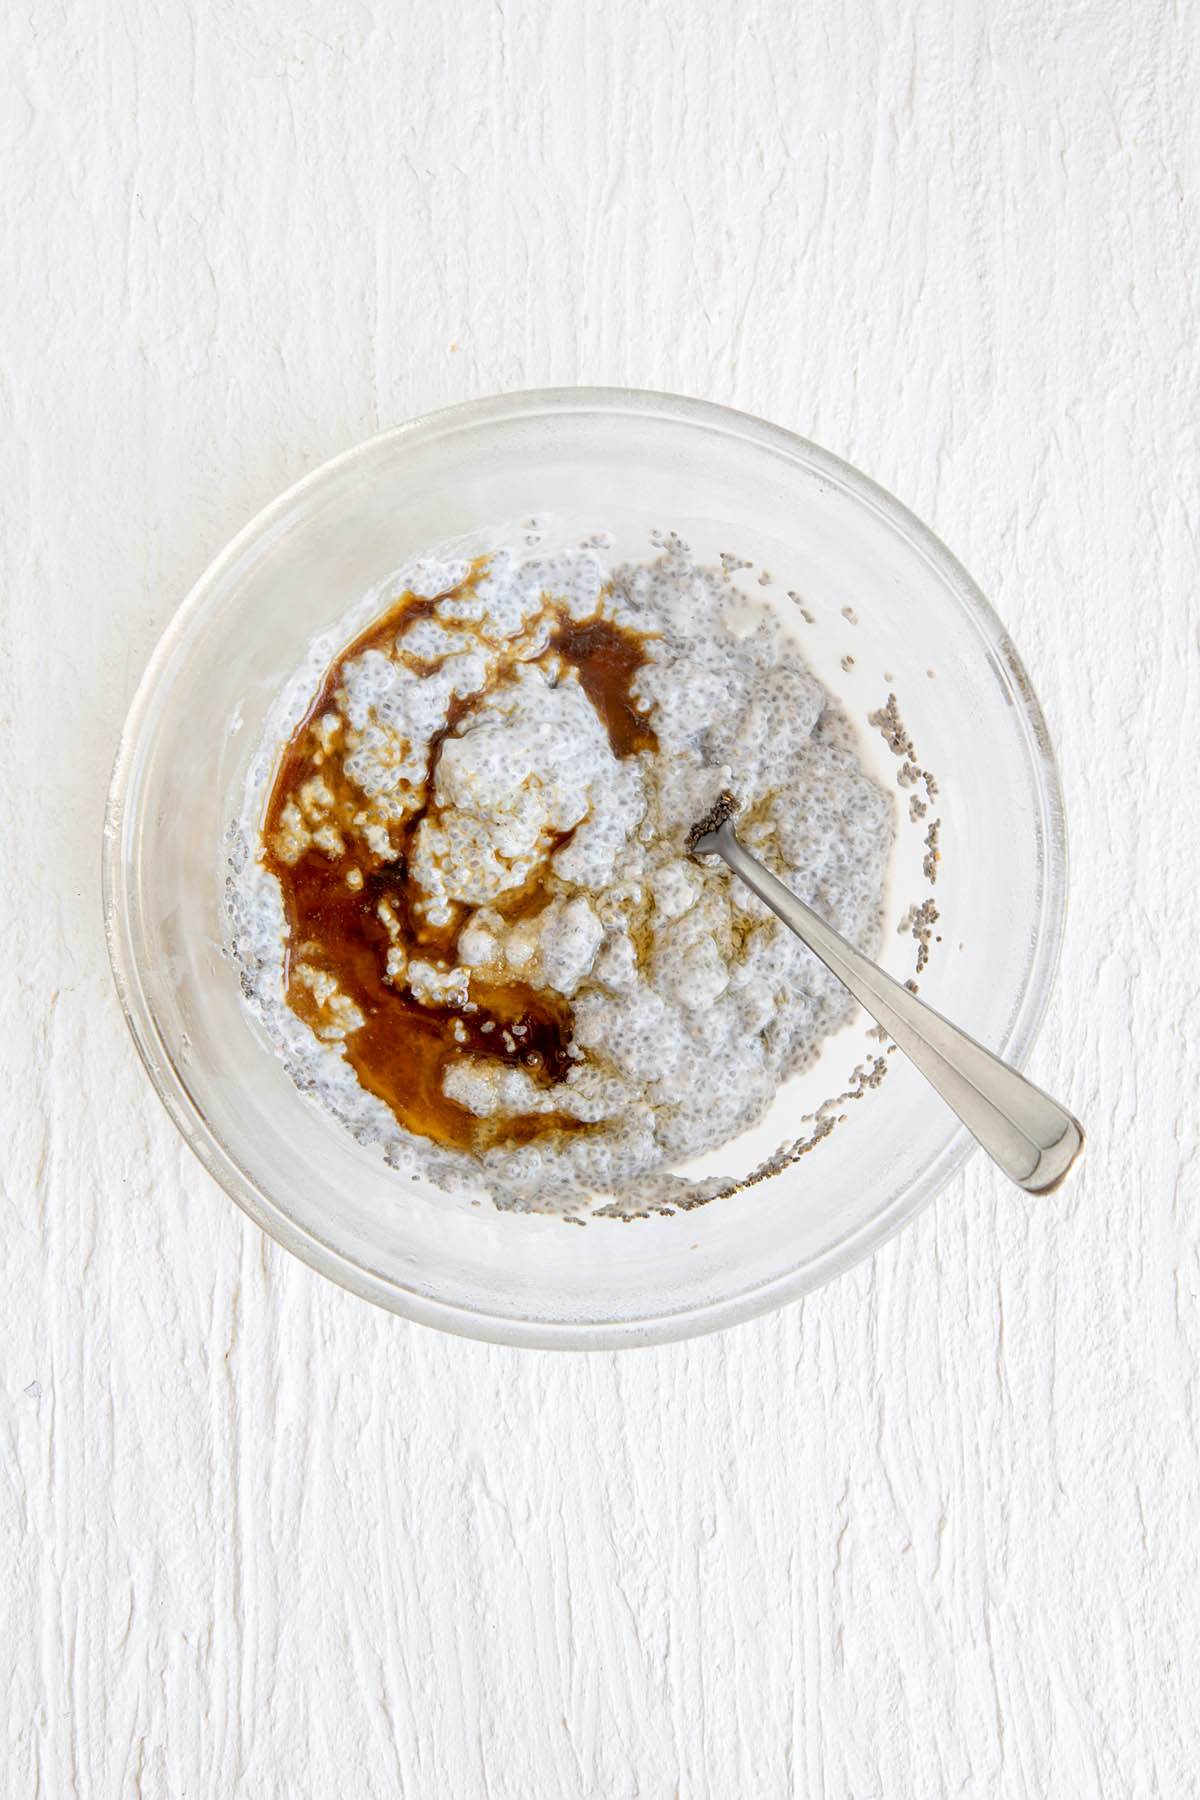 Chia pudding with maple syrup, vanilla extract, and salt added.